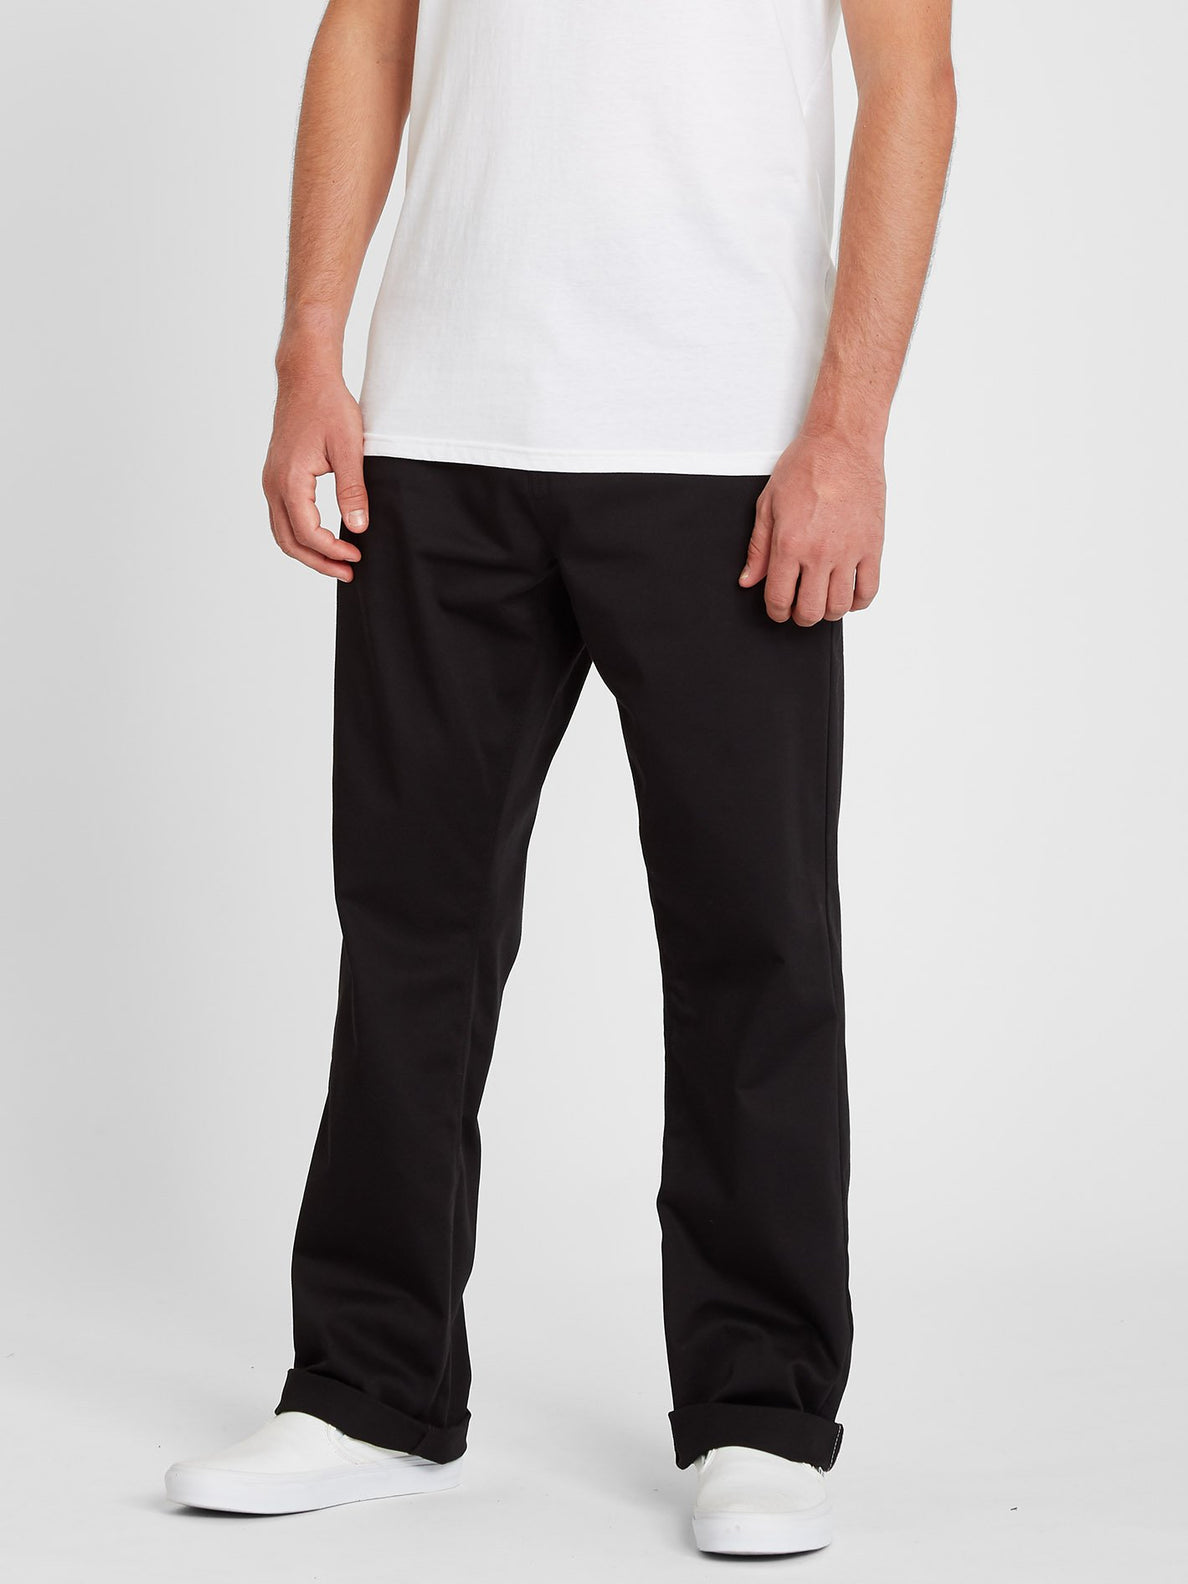 Substance Chino Pant - Black (A1112104_BLK) [F]